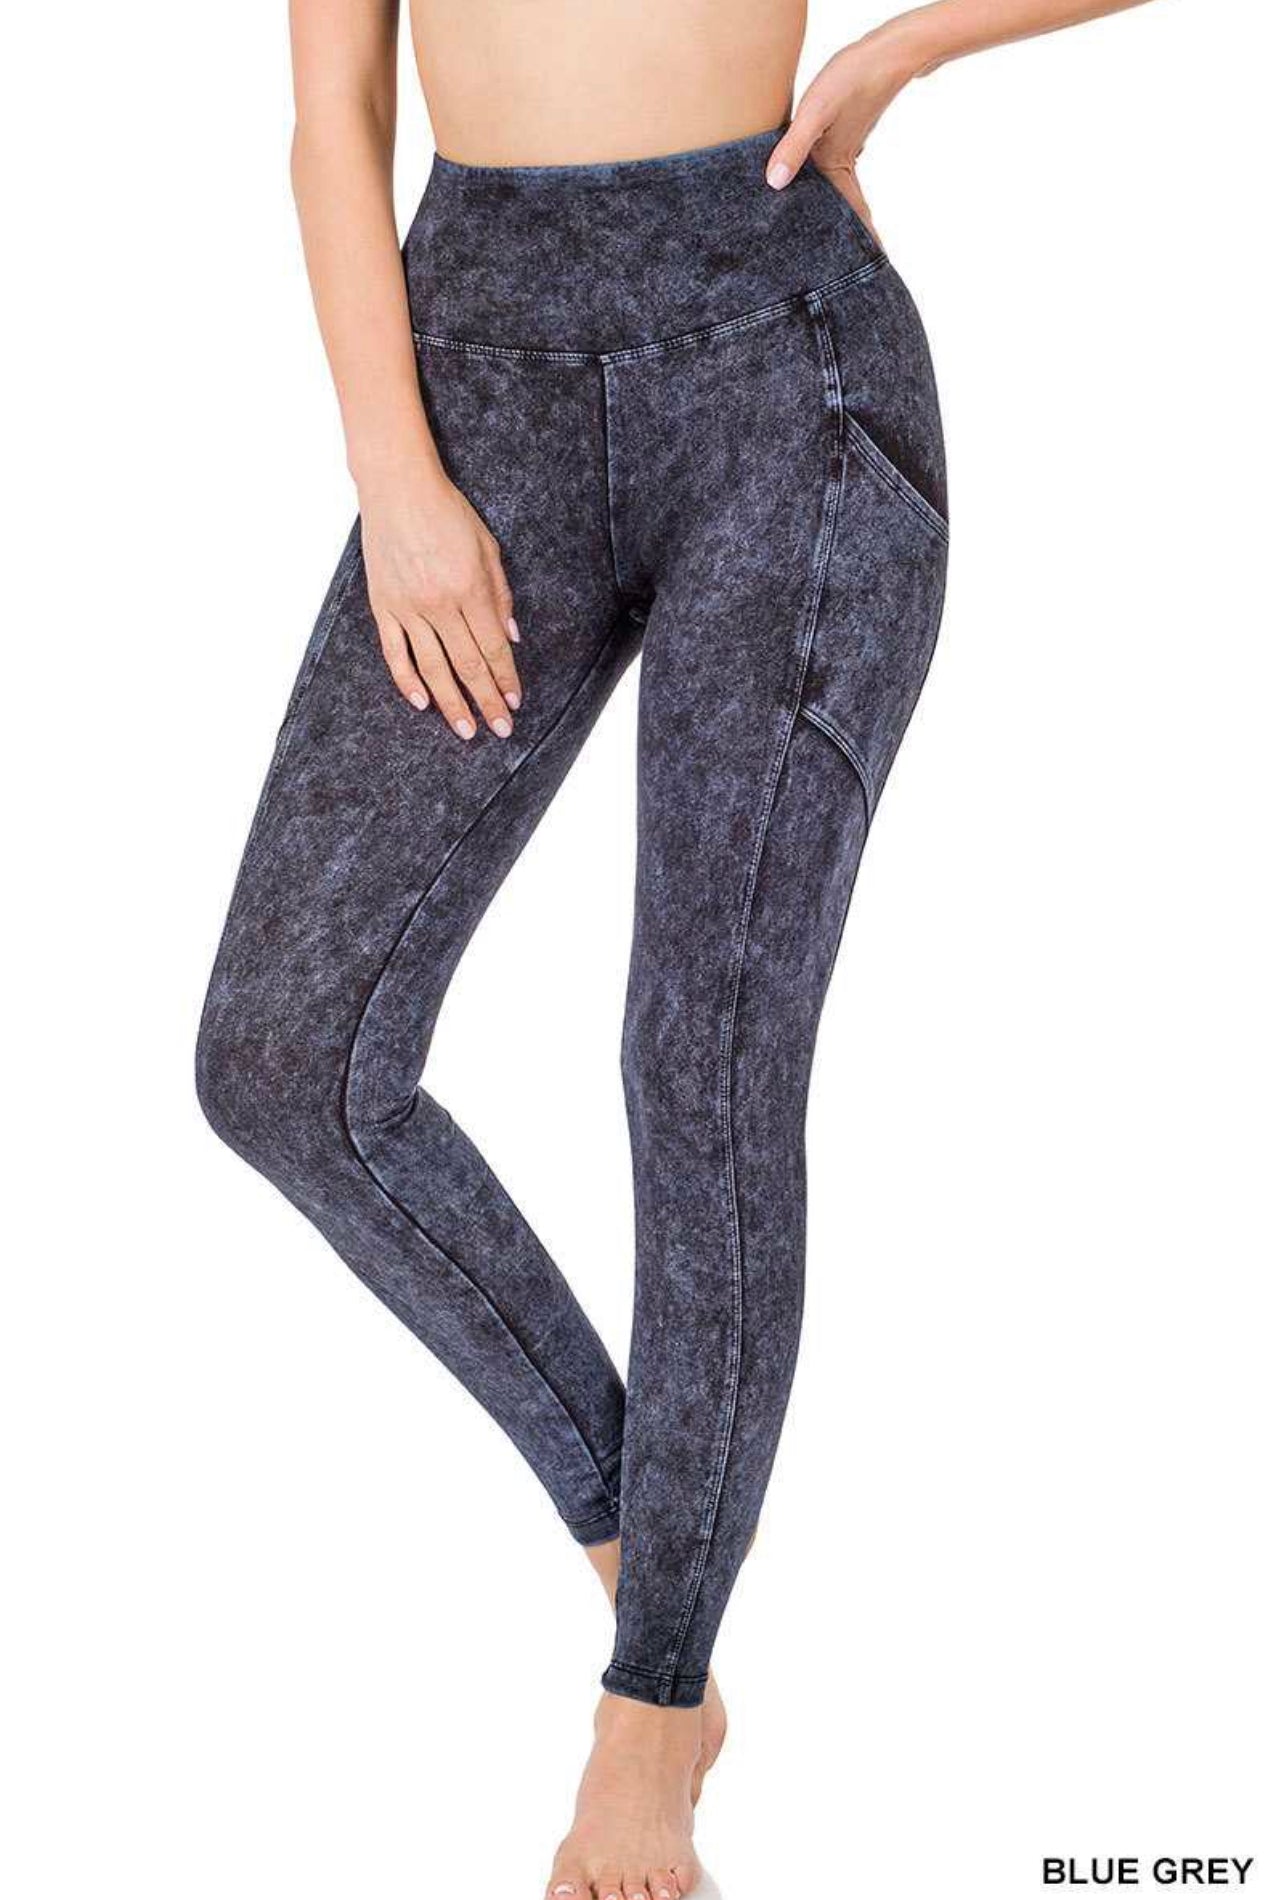 Blue Grey Mineral Wash Leggings with Pockets